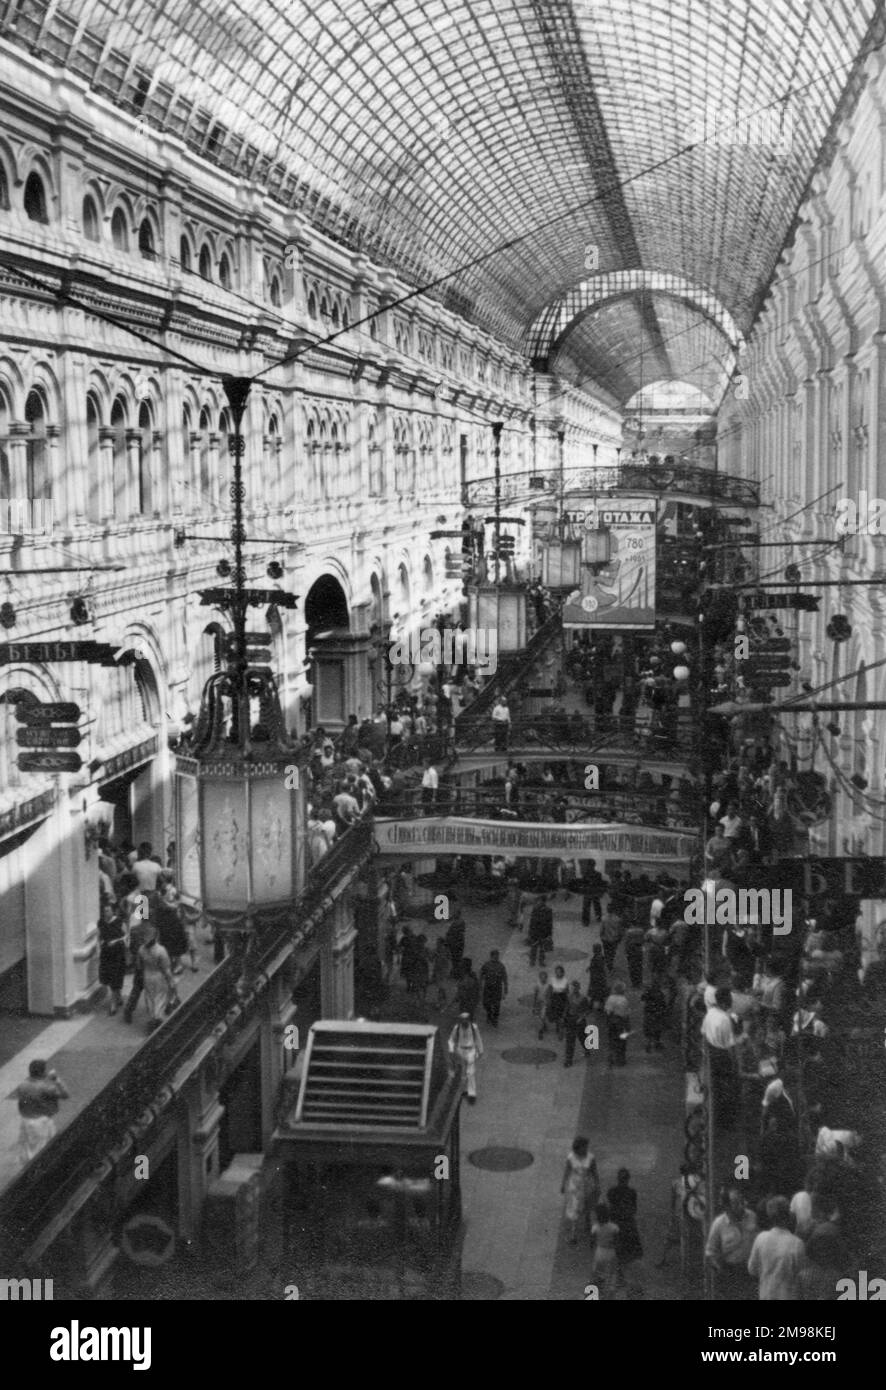 Interior view of a department store in the USSR -- probably GUM in Moscow, with its famous glass roof. Stock Photo